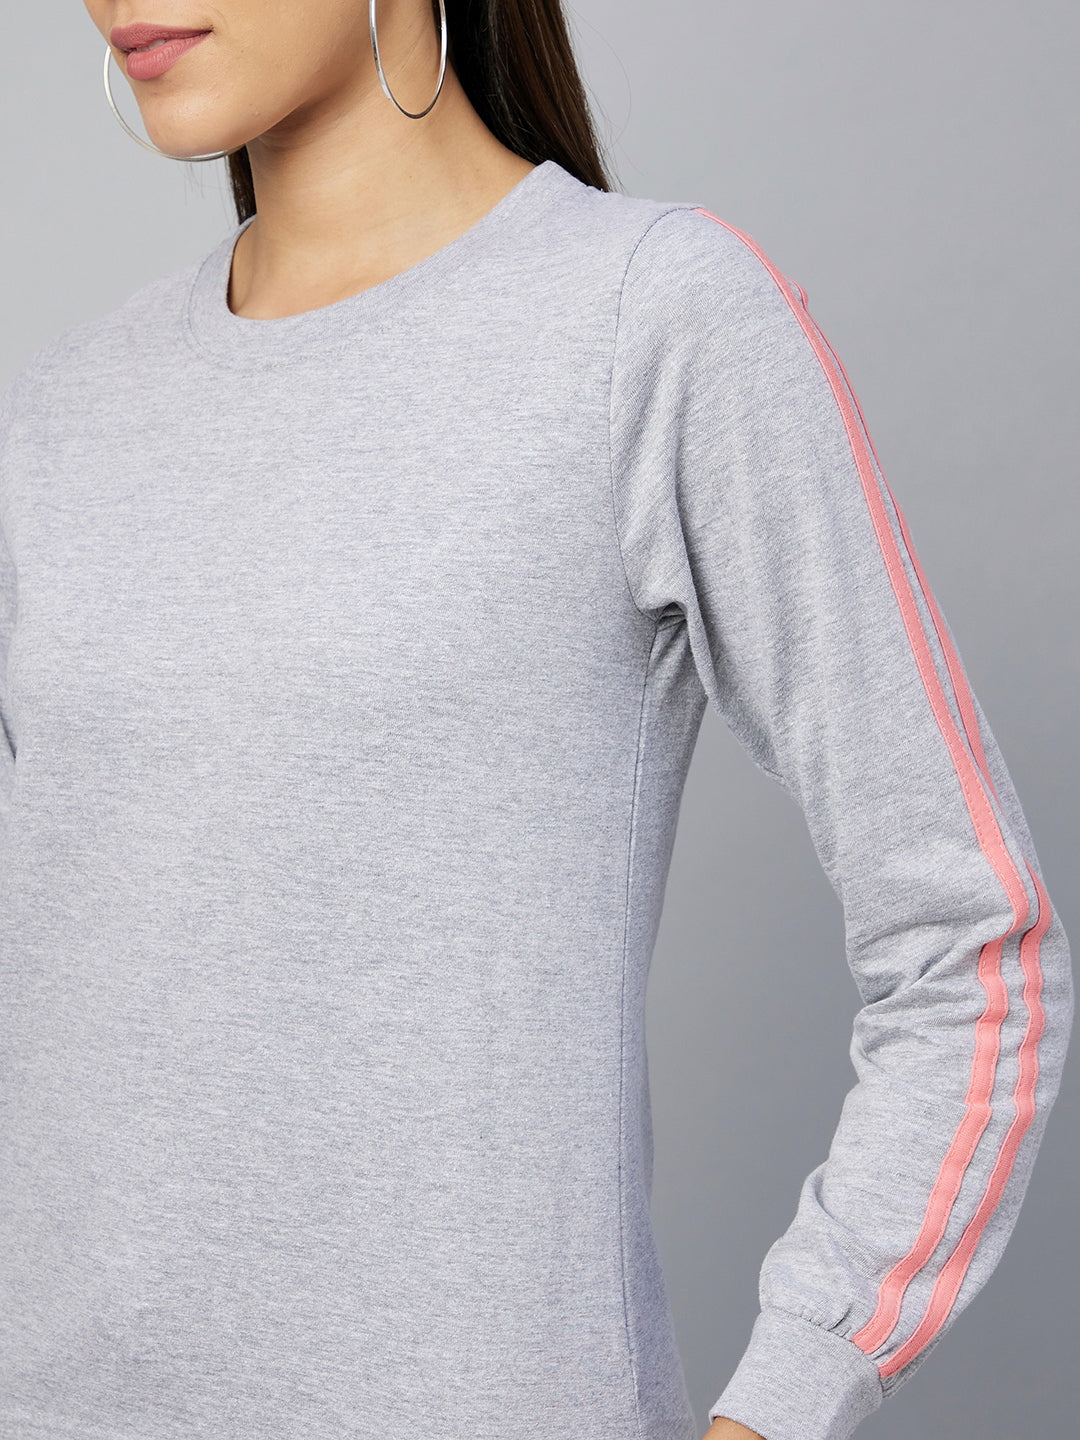 Women's Cotton Light Grey Track Suit Set with Pink Stripe